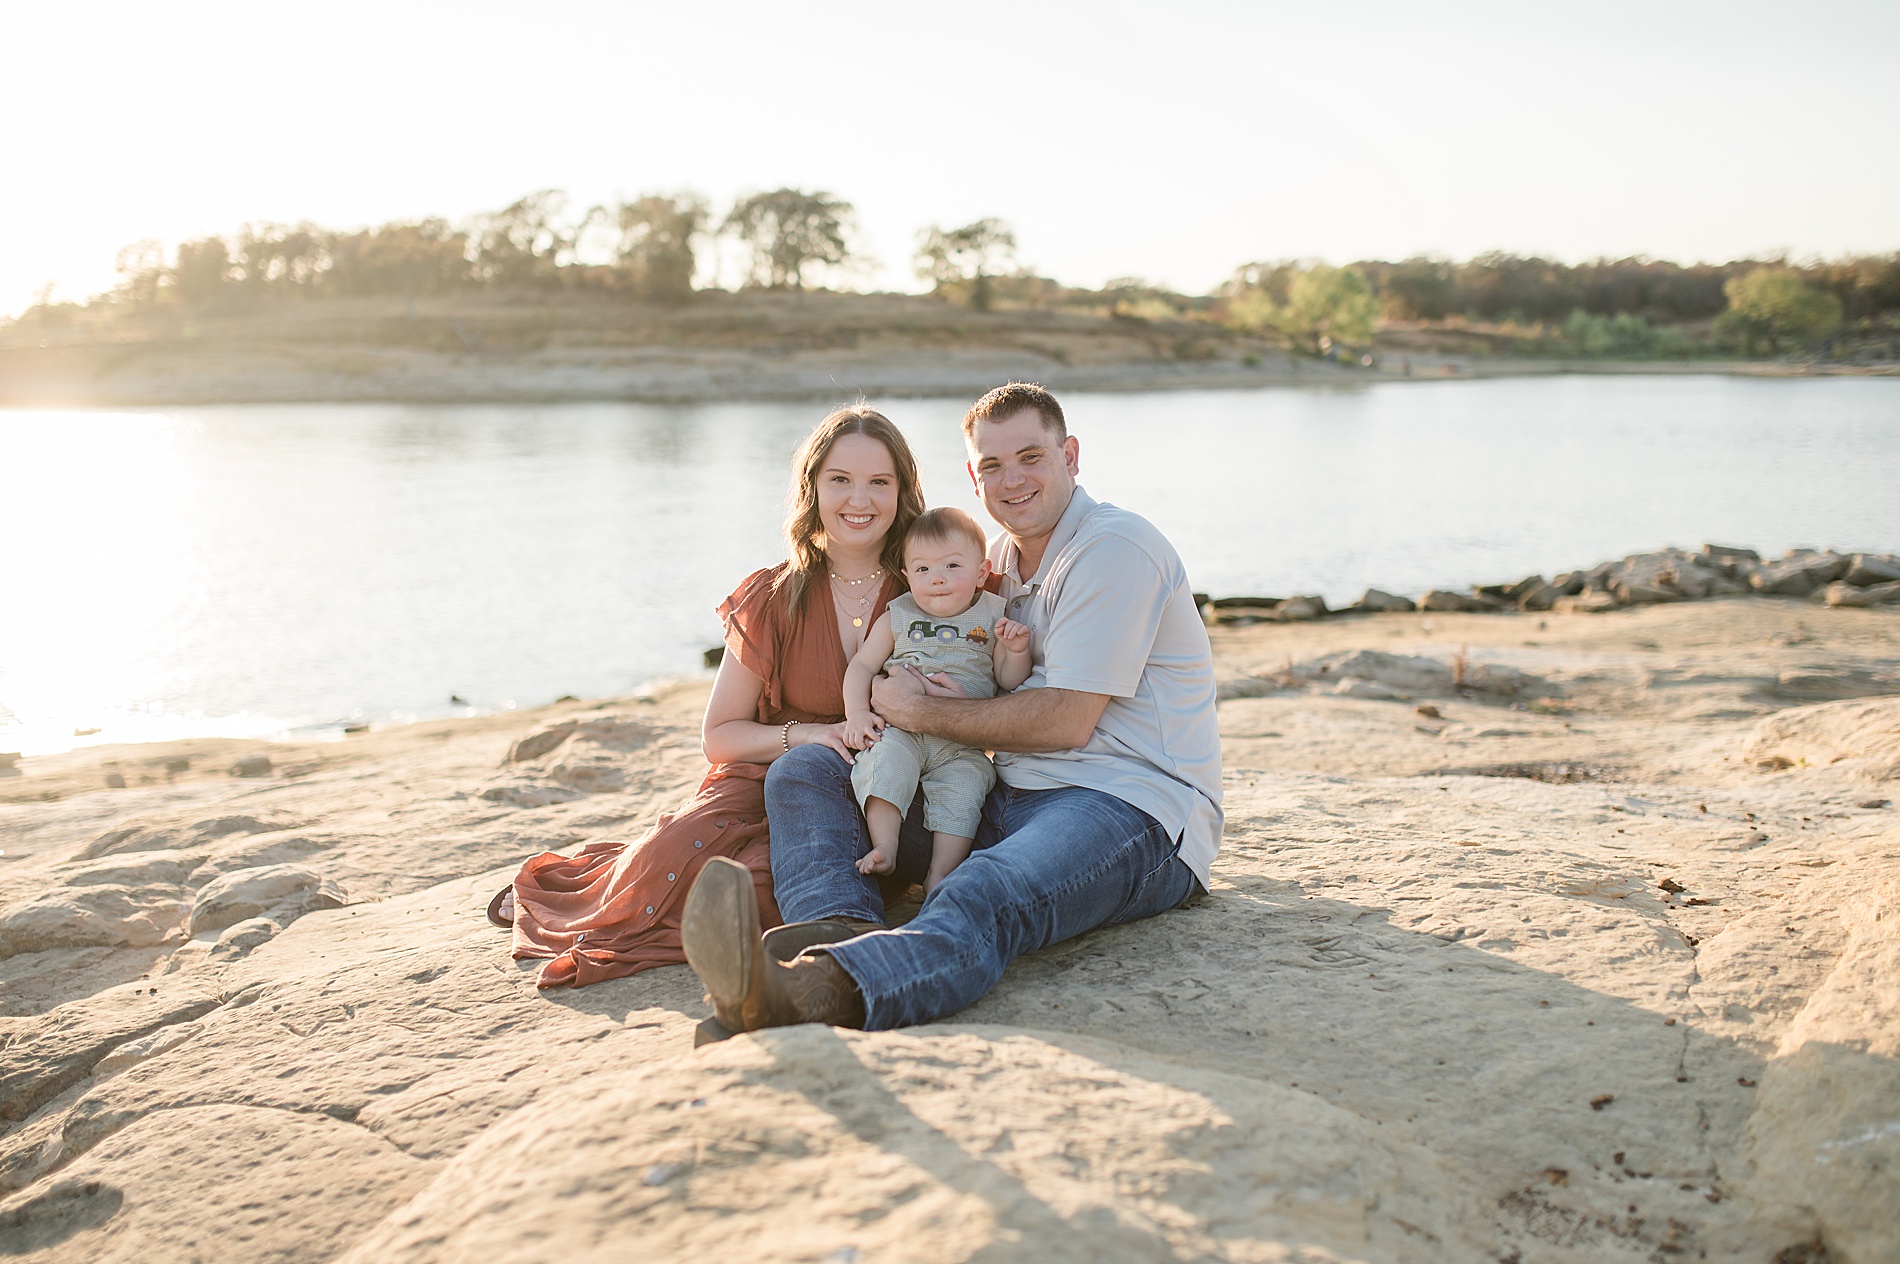 waterfront family portraits from milestone session photographed by Lindsey Dutton Photography, a Dallas newborn photographer
